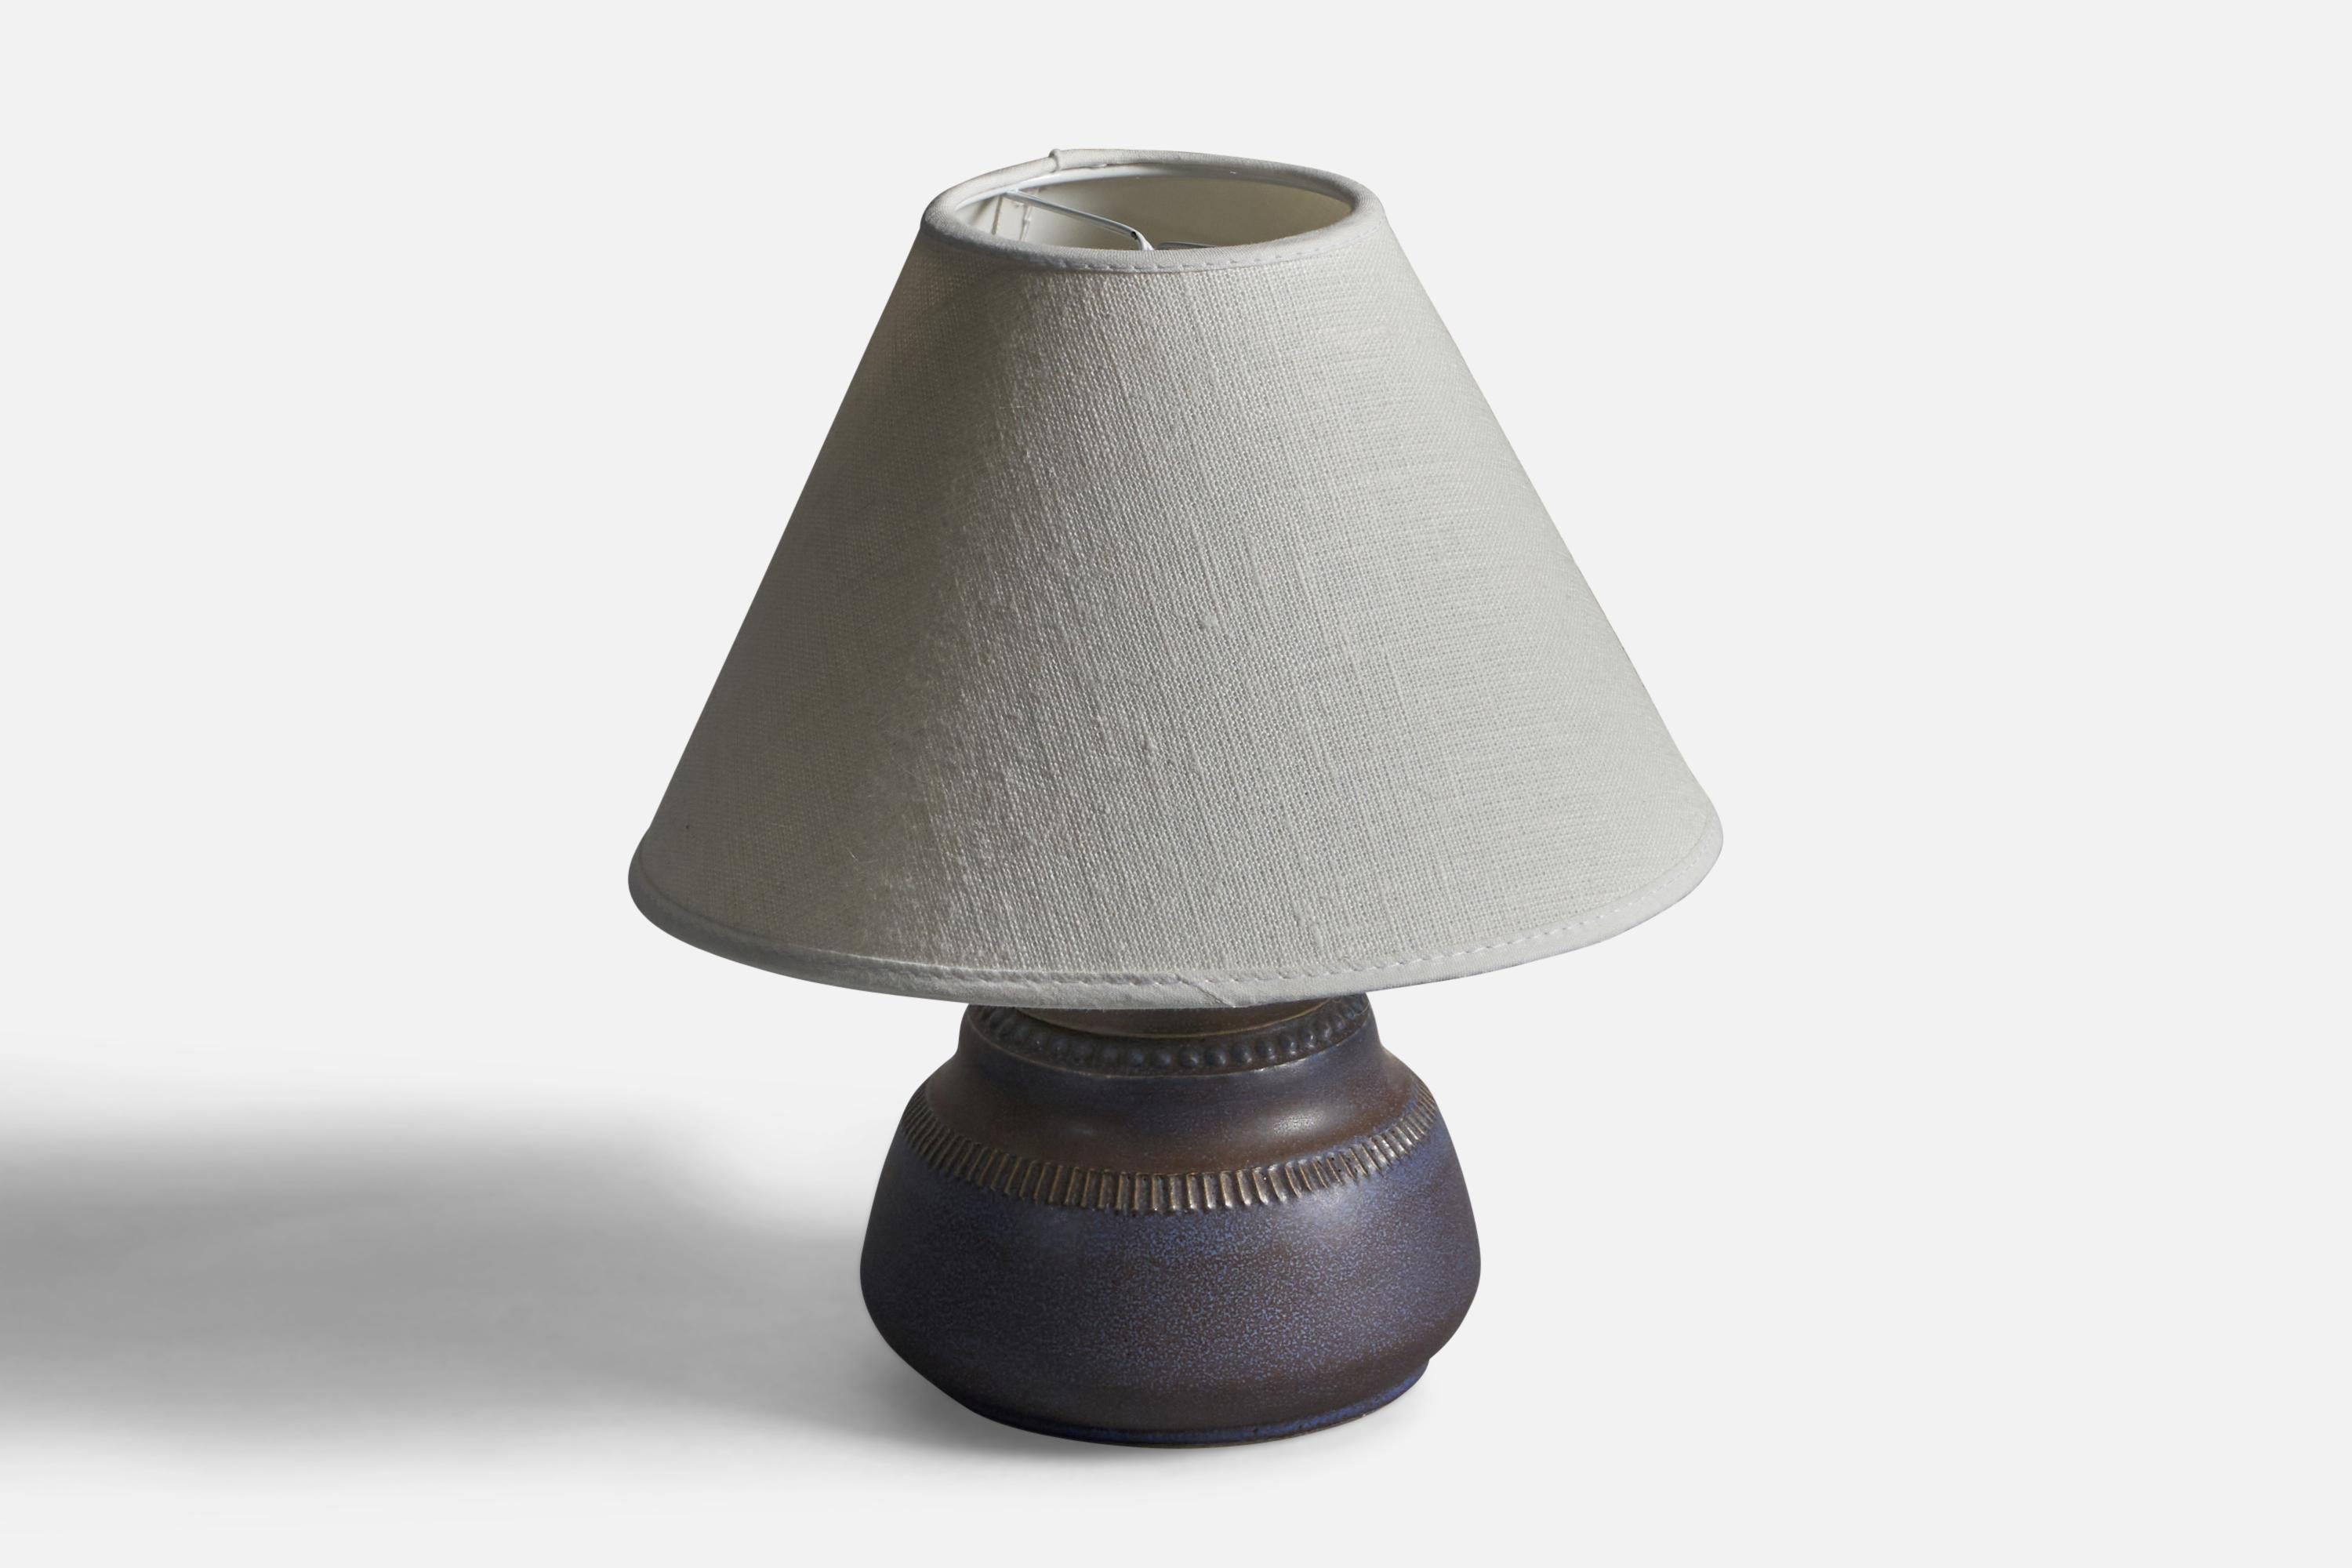 A blue-glazed stoneware table lamp designed and produced by Klase Höganäs, 1960s.

Dimensions of Lamp (inches): 6.5